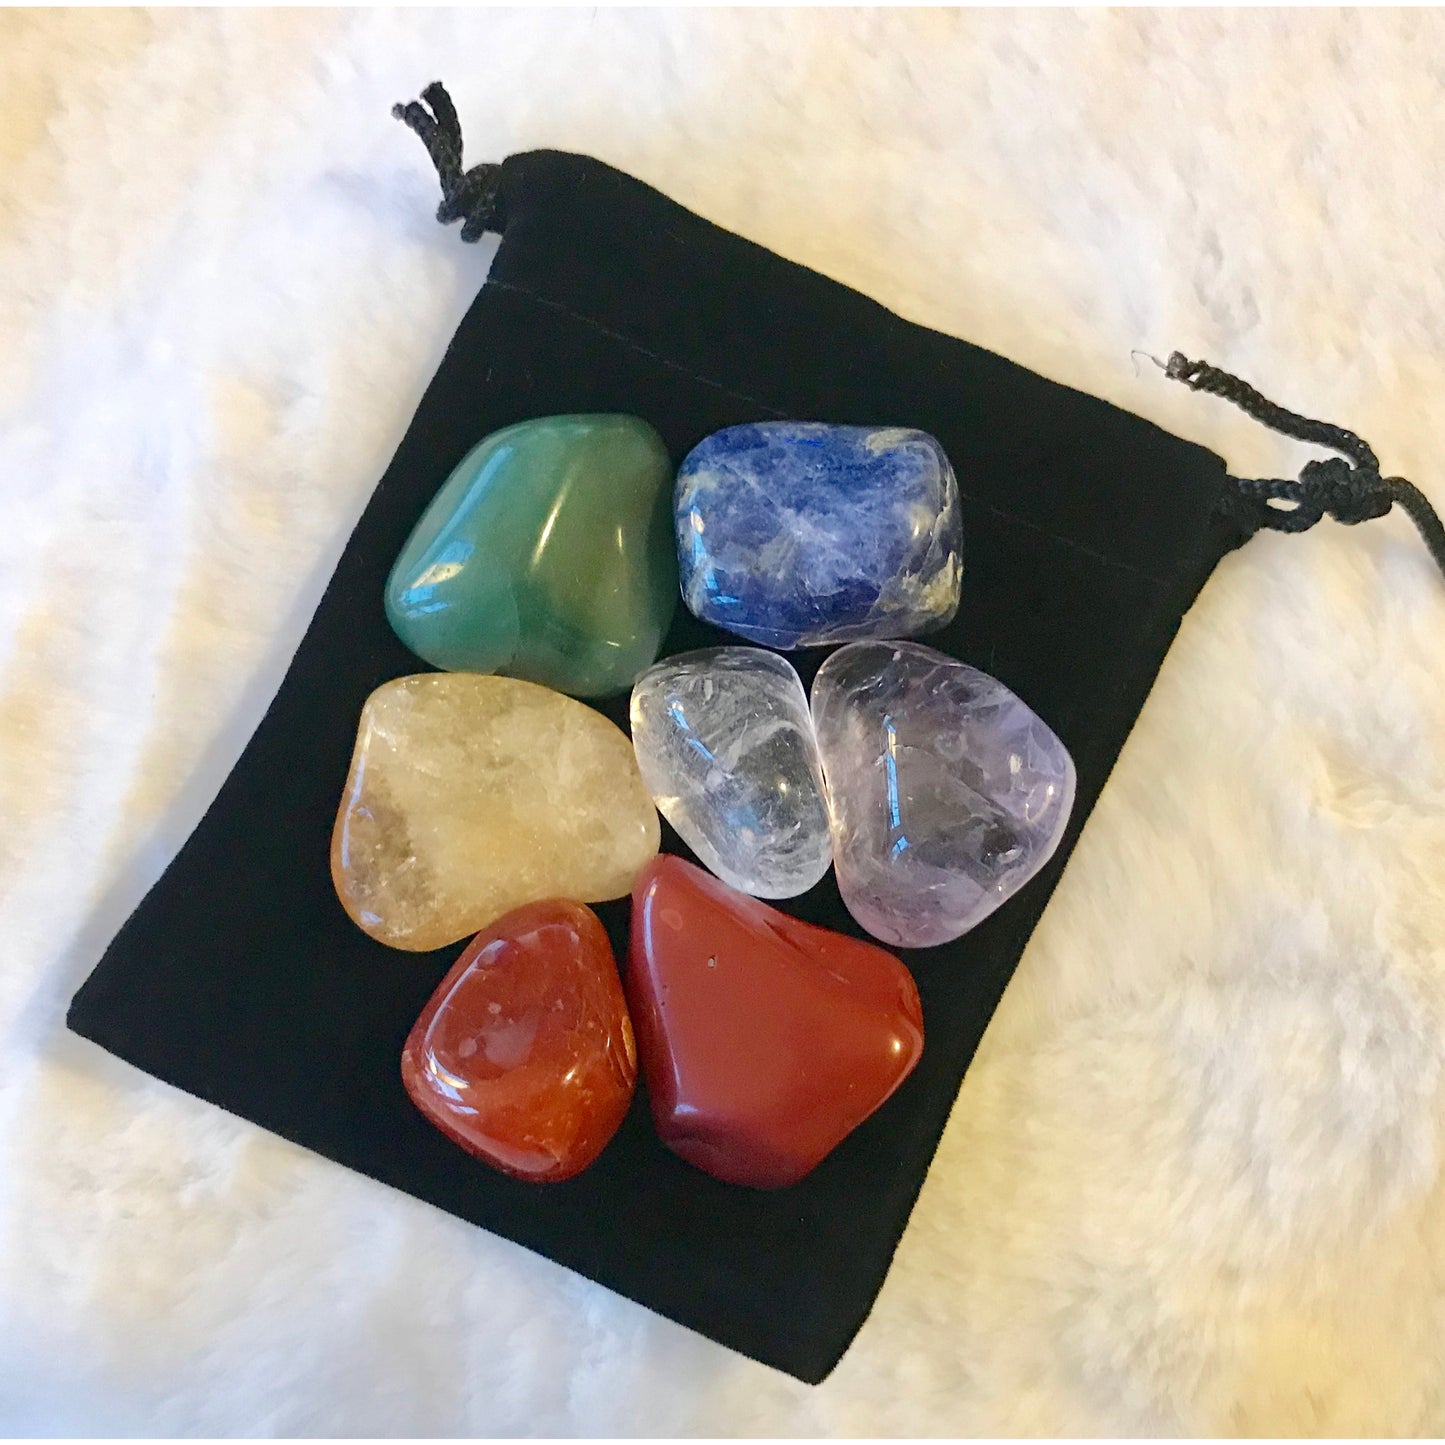 Chakra Crystal Set of 7 Tumbled Crystals to Harmonize, Balance and Align your Inner Energy System